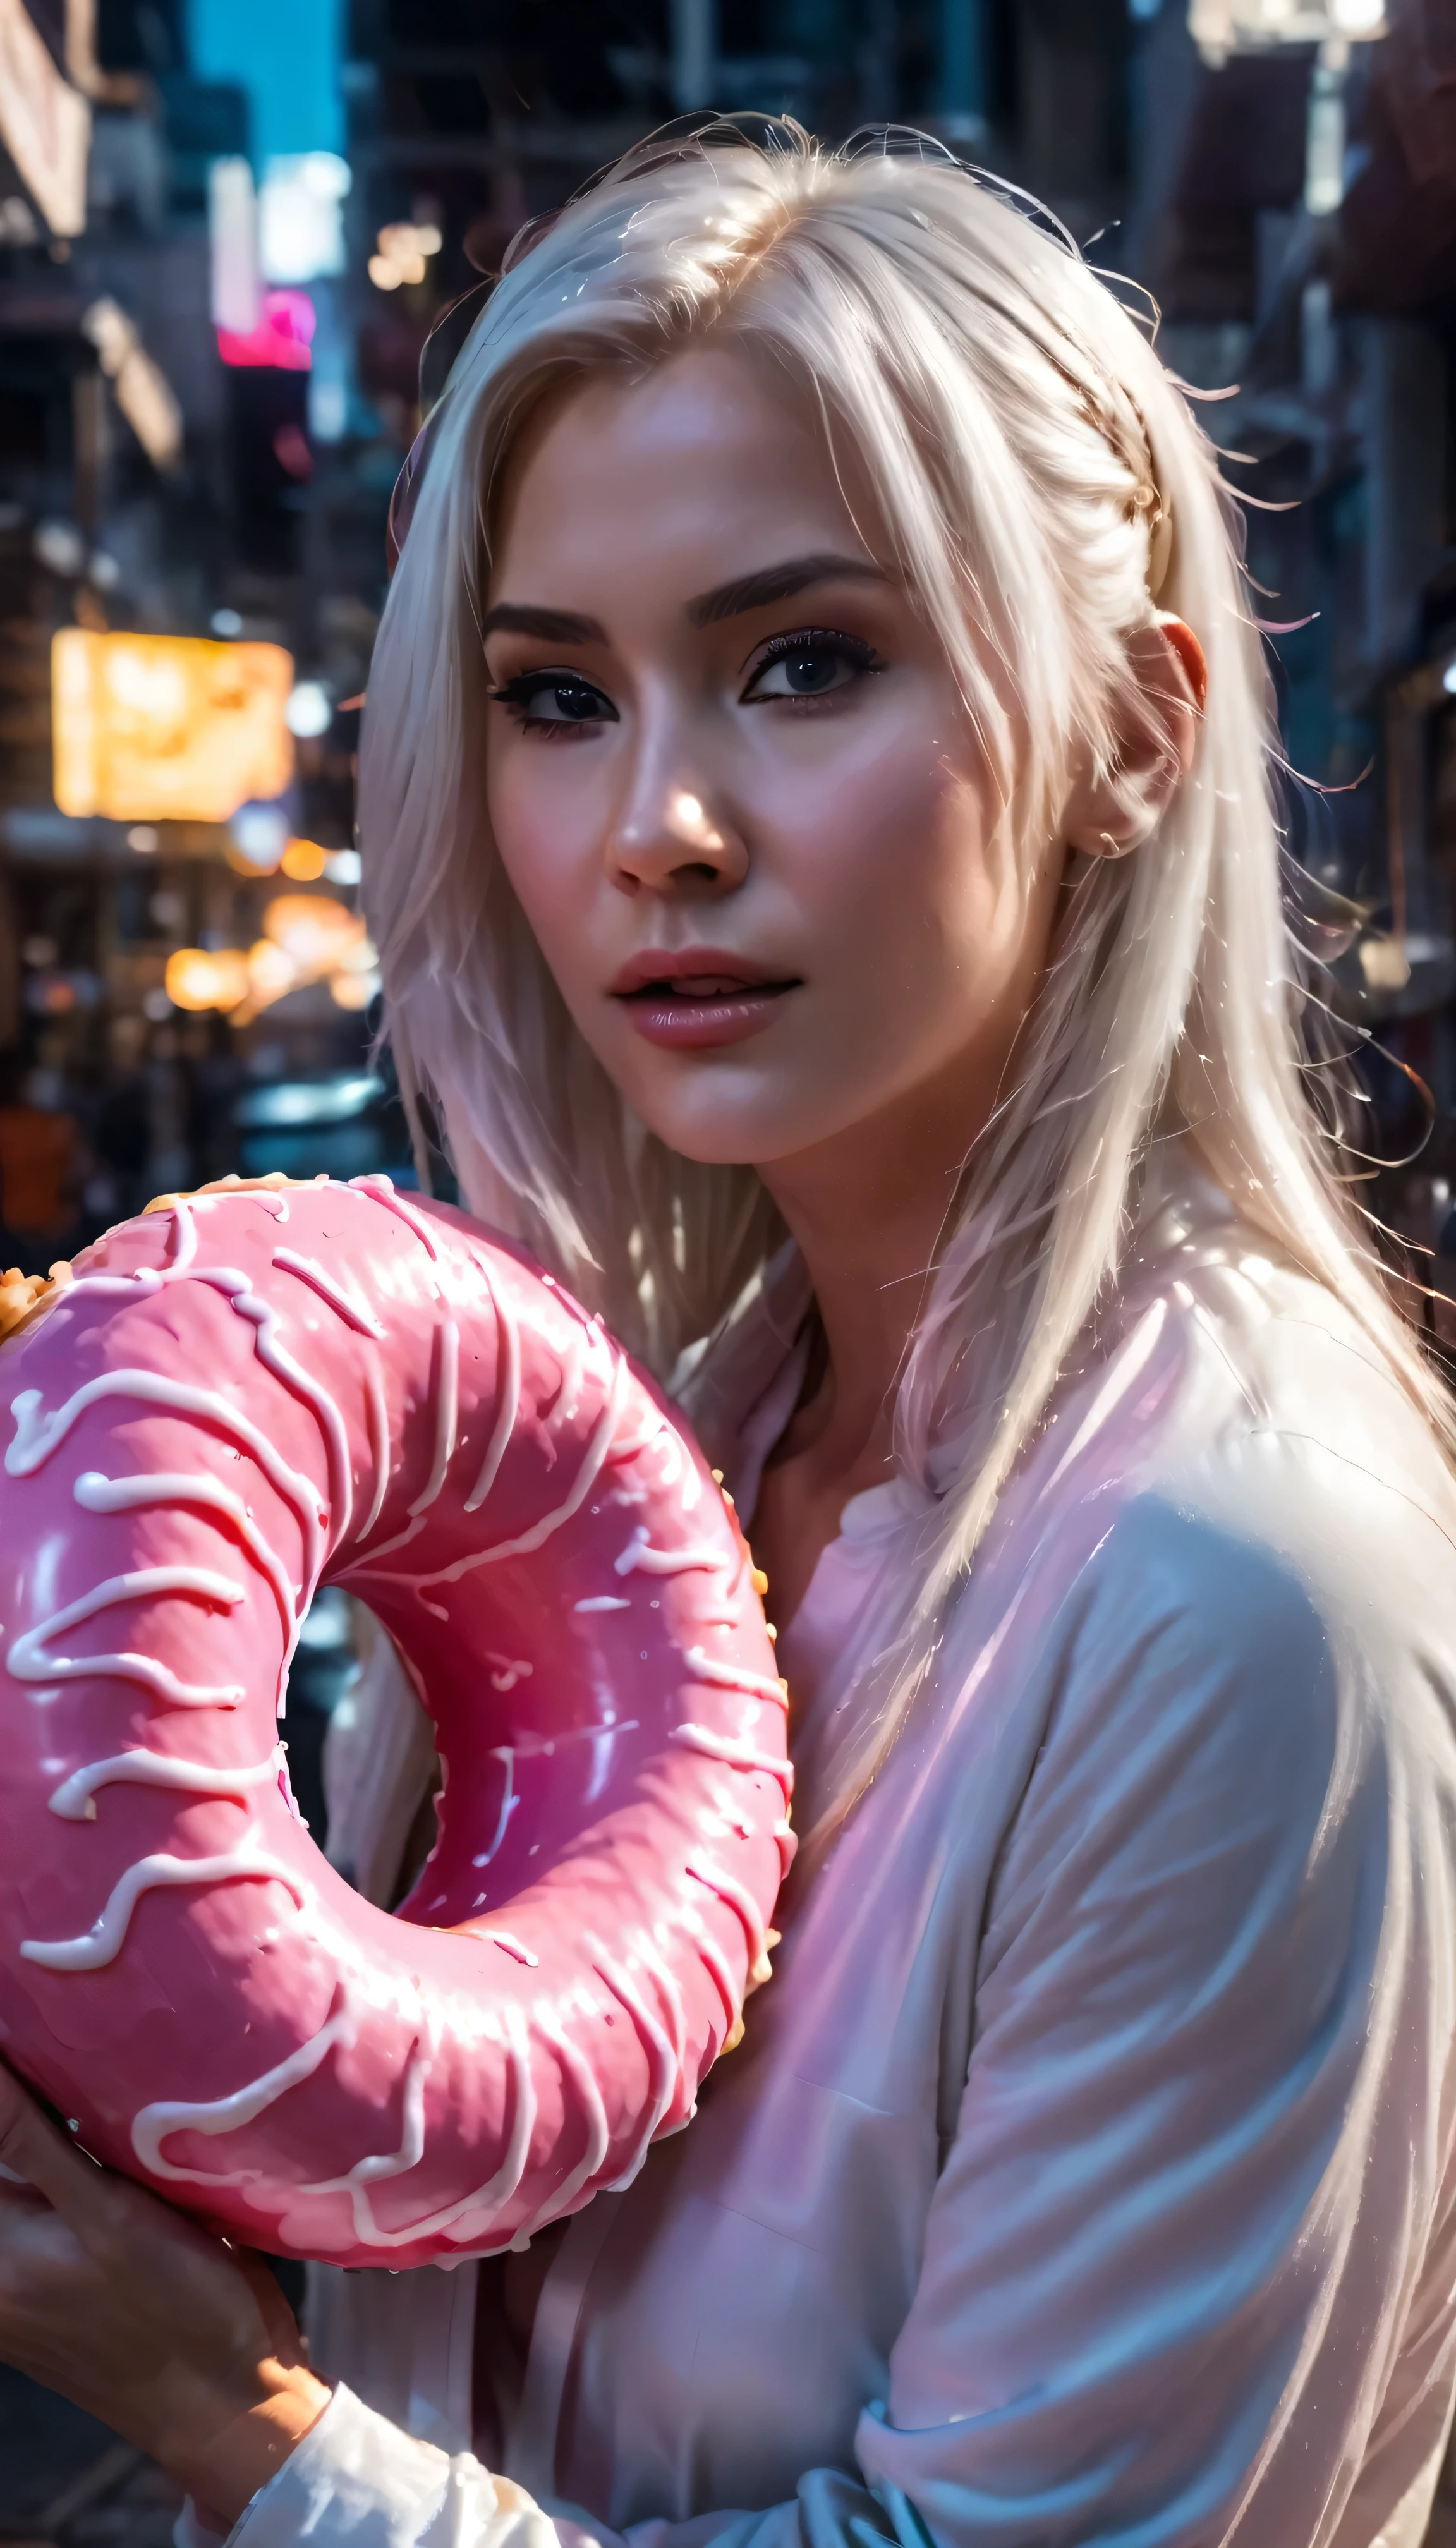 She craves for donut.blond woman with white hair and a pink donut in her mouth.She holds the huge  pink donut upright in her hands. The donut has white melted sugar coating running in veins.there is red nightlamp that gives sensual lightning. close - up profile face, detailed closeup face, close - up profile, character close up, closeup of face, detailed unblurred face, closeup shot of face, closeup of the face, cinematic close-up bust shot, character close-up, close up of face, tifa lockhart with white hair